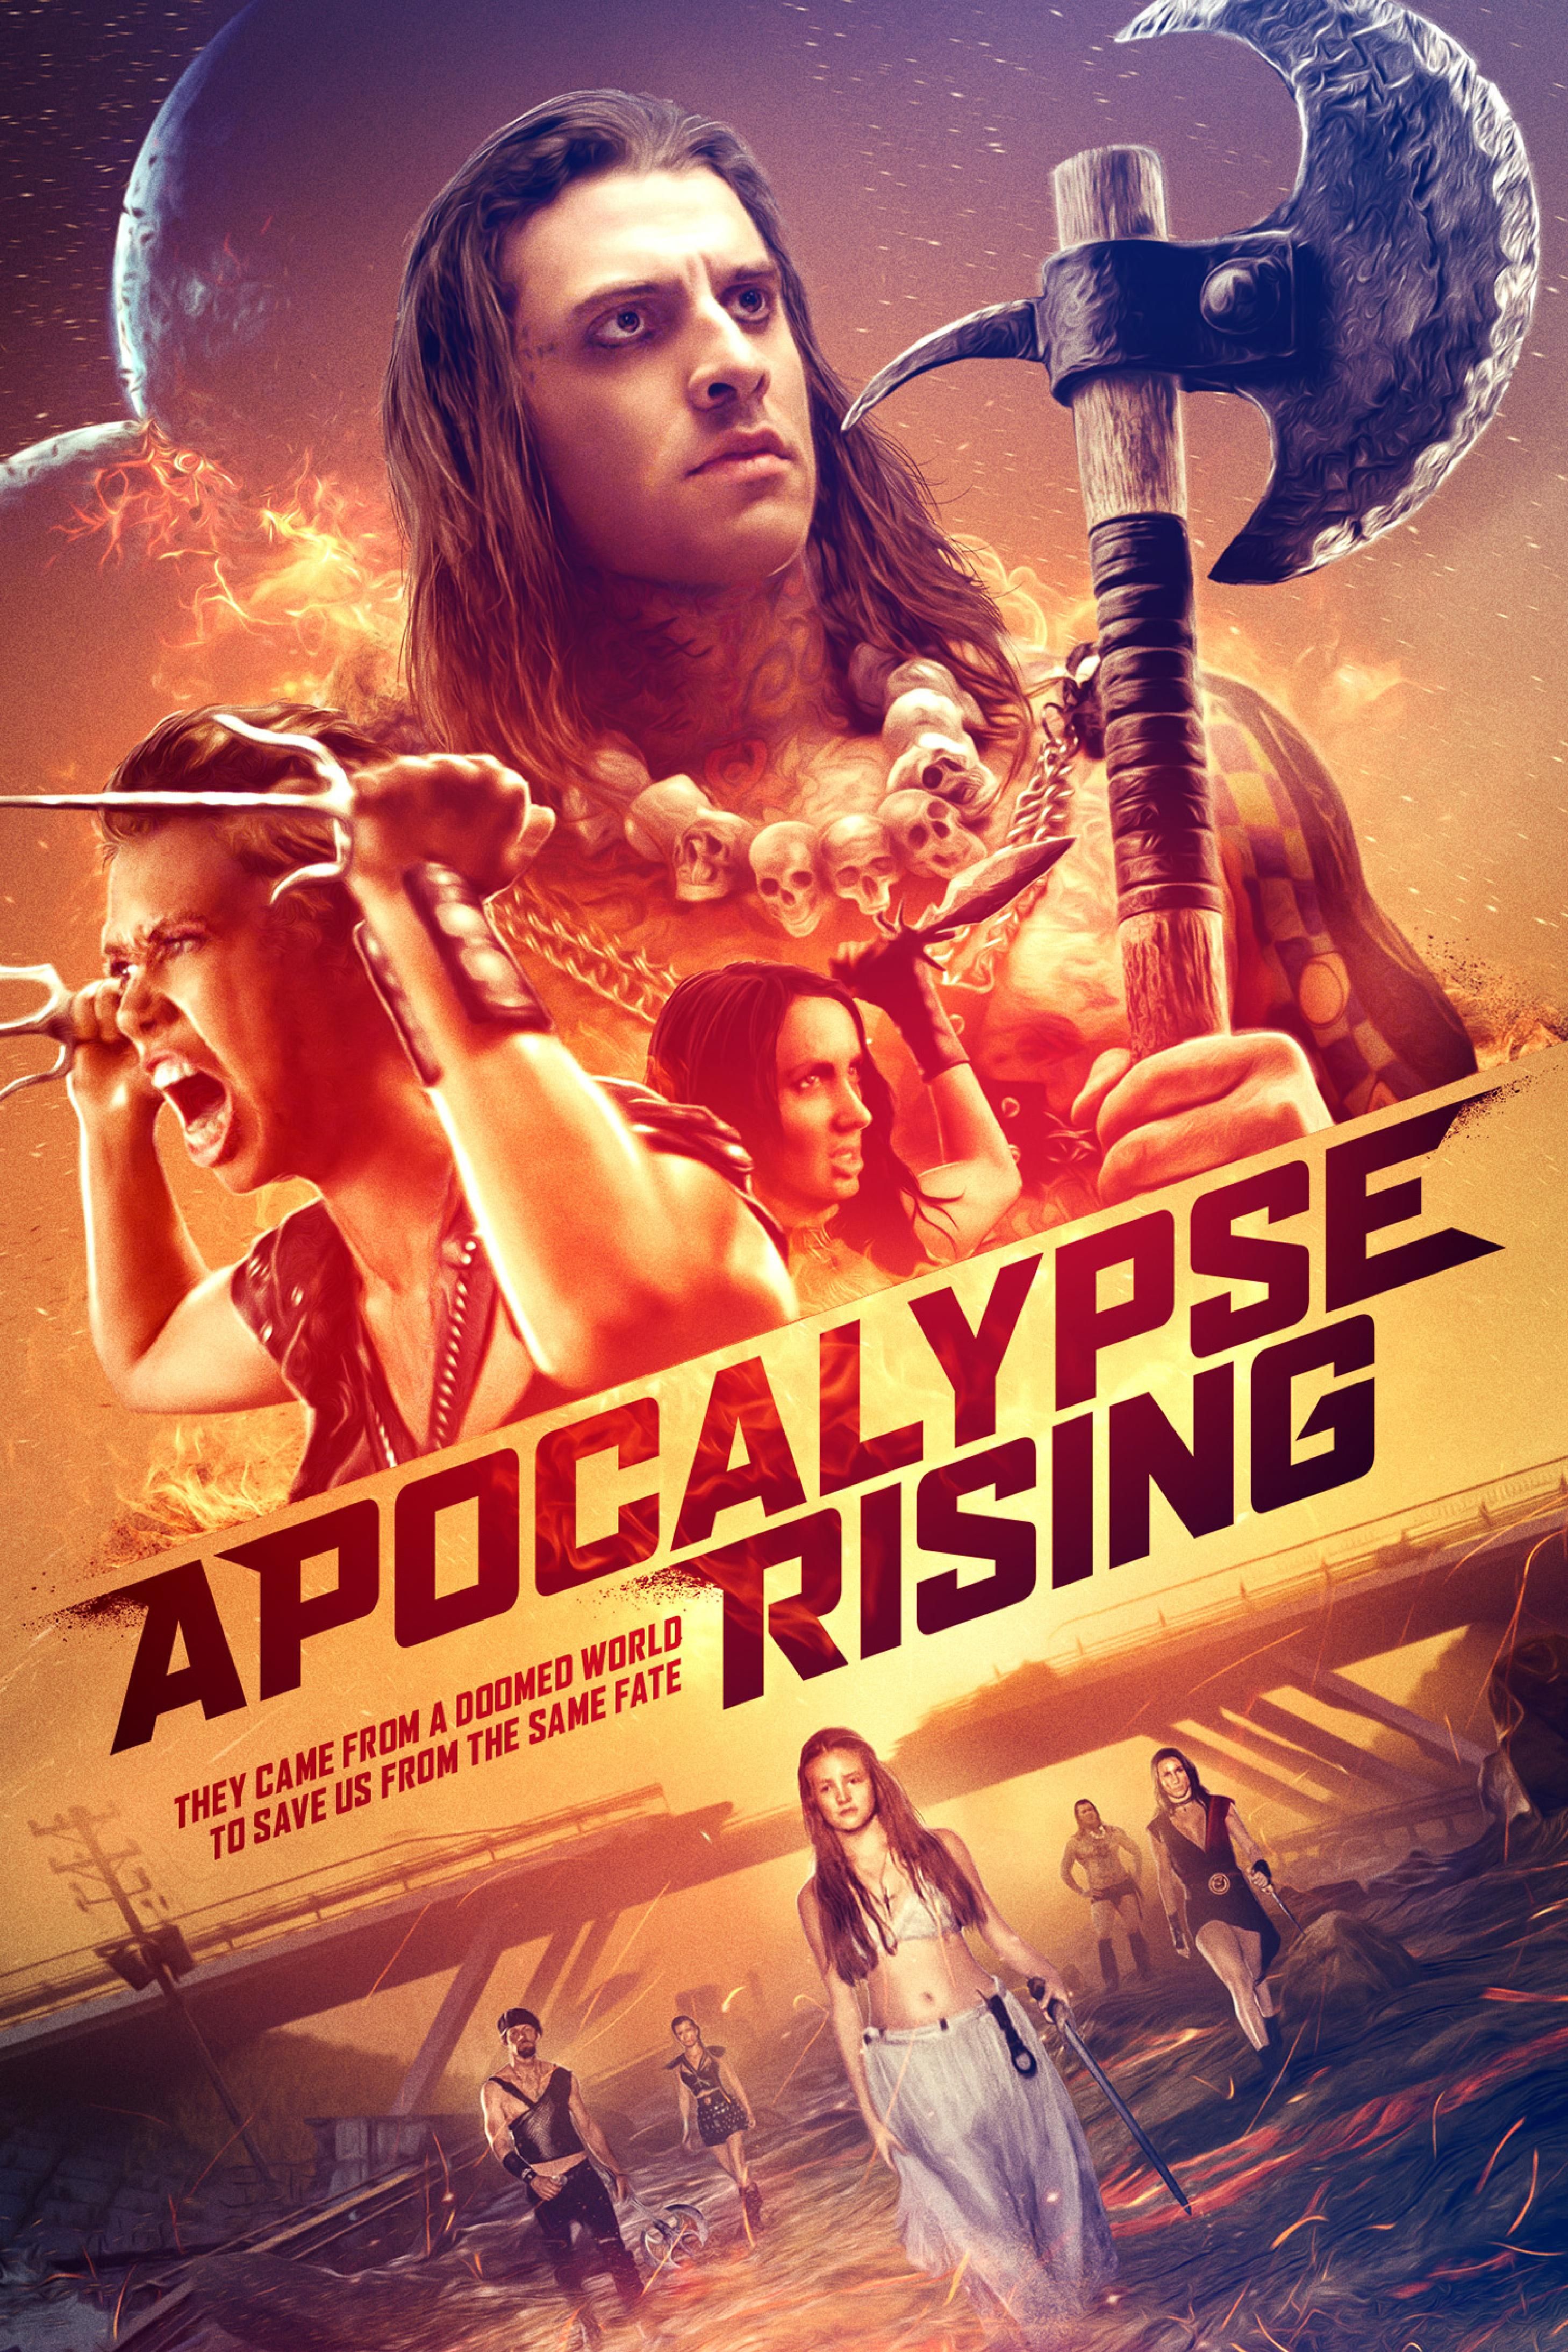 Apocalypse Rising (2018) UNRATED Hindi Dubbed BluRay download full movie